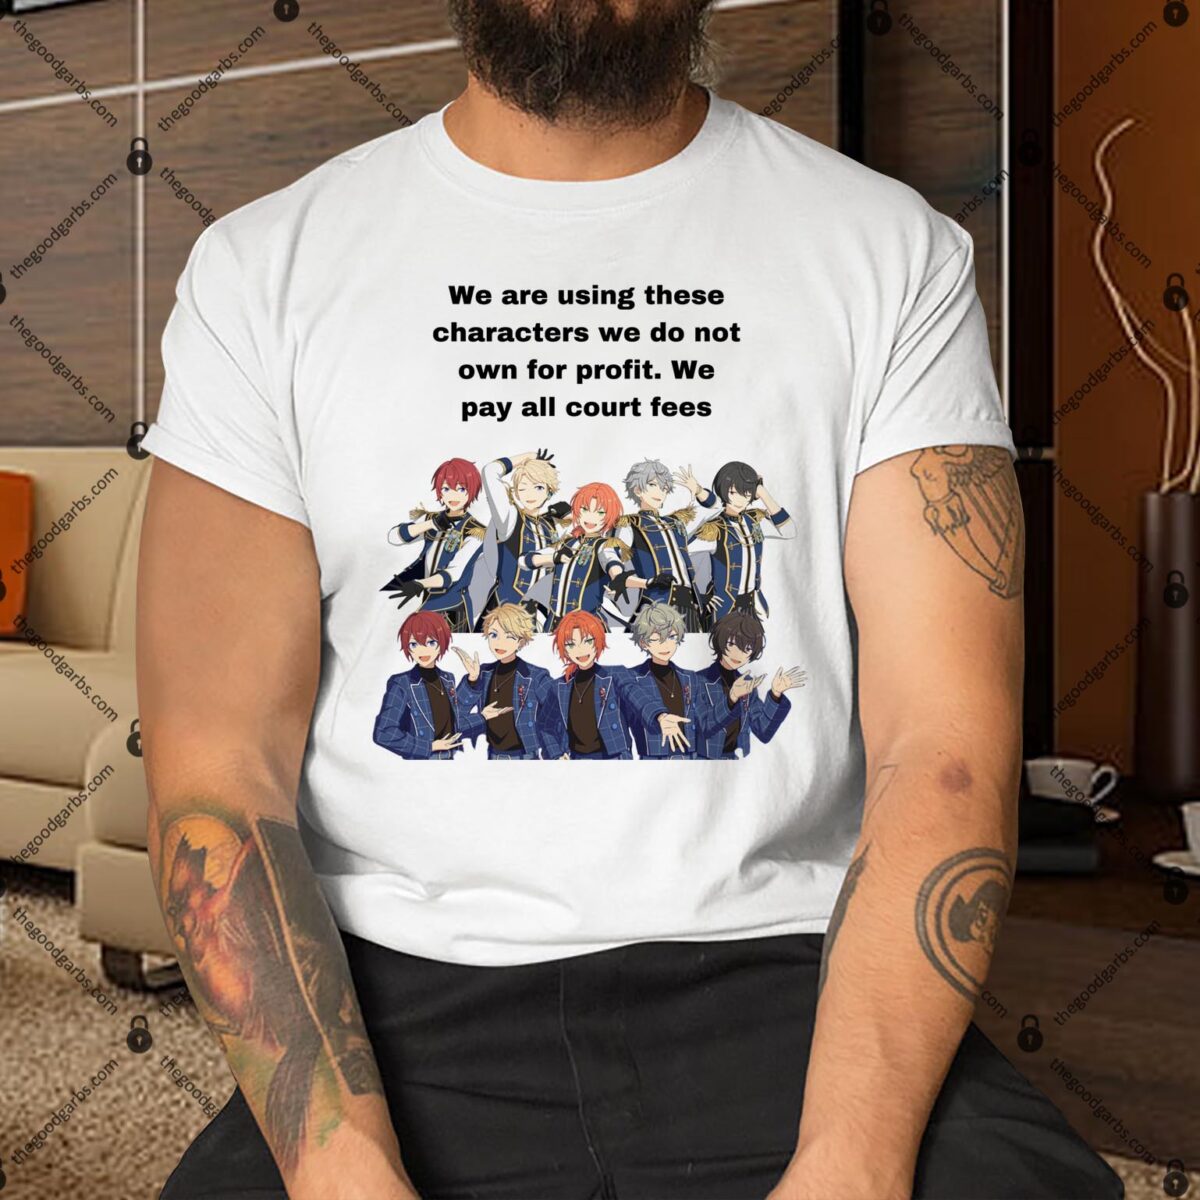 We Are Using These Characters We Do Not Own For Profit Shirt